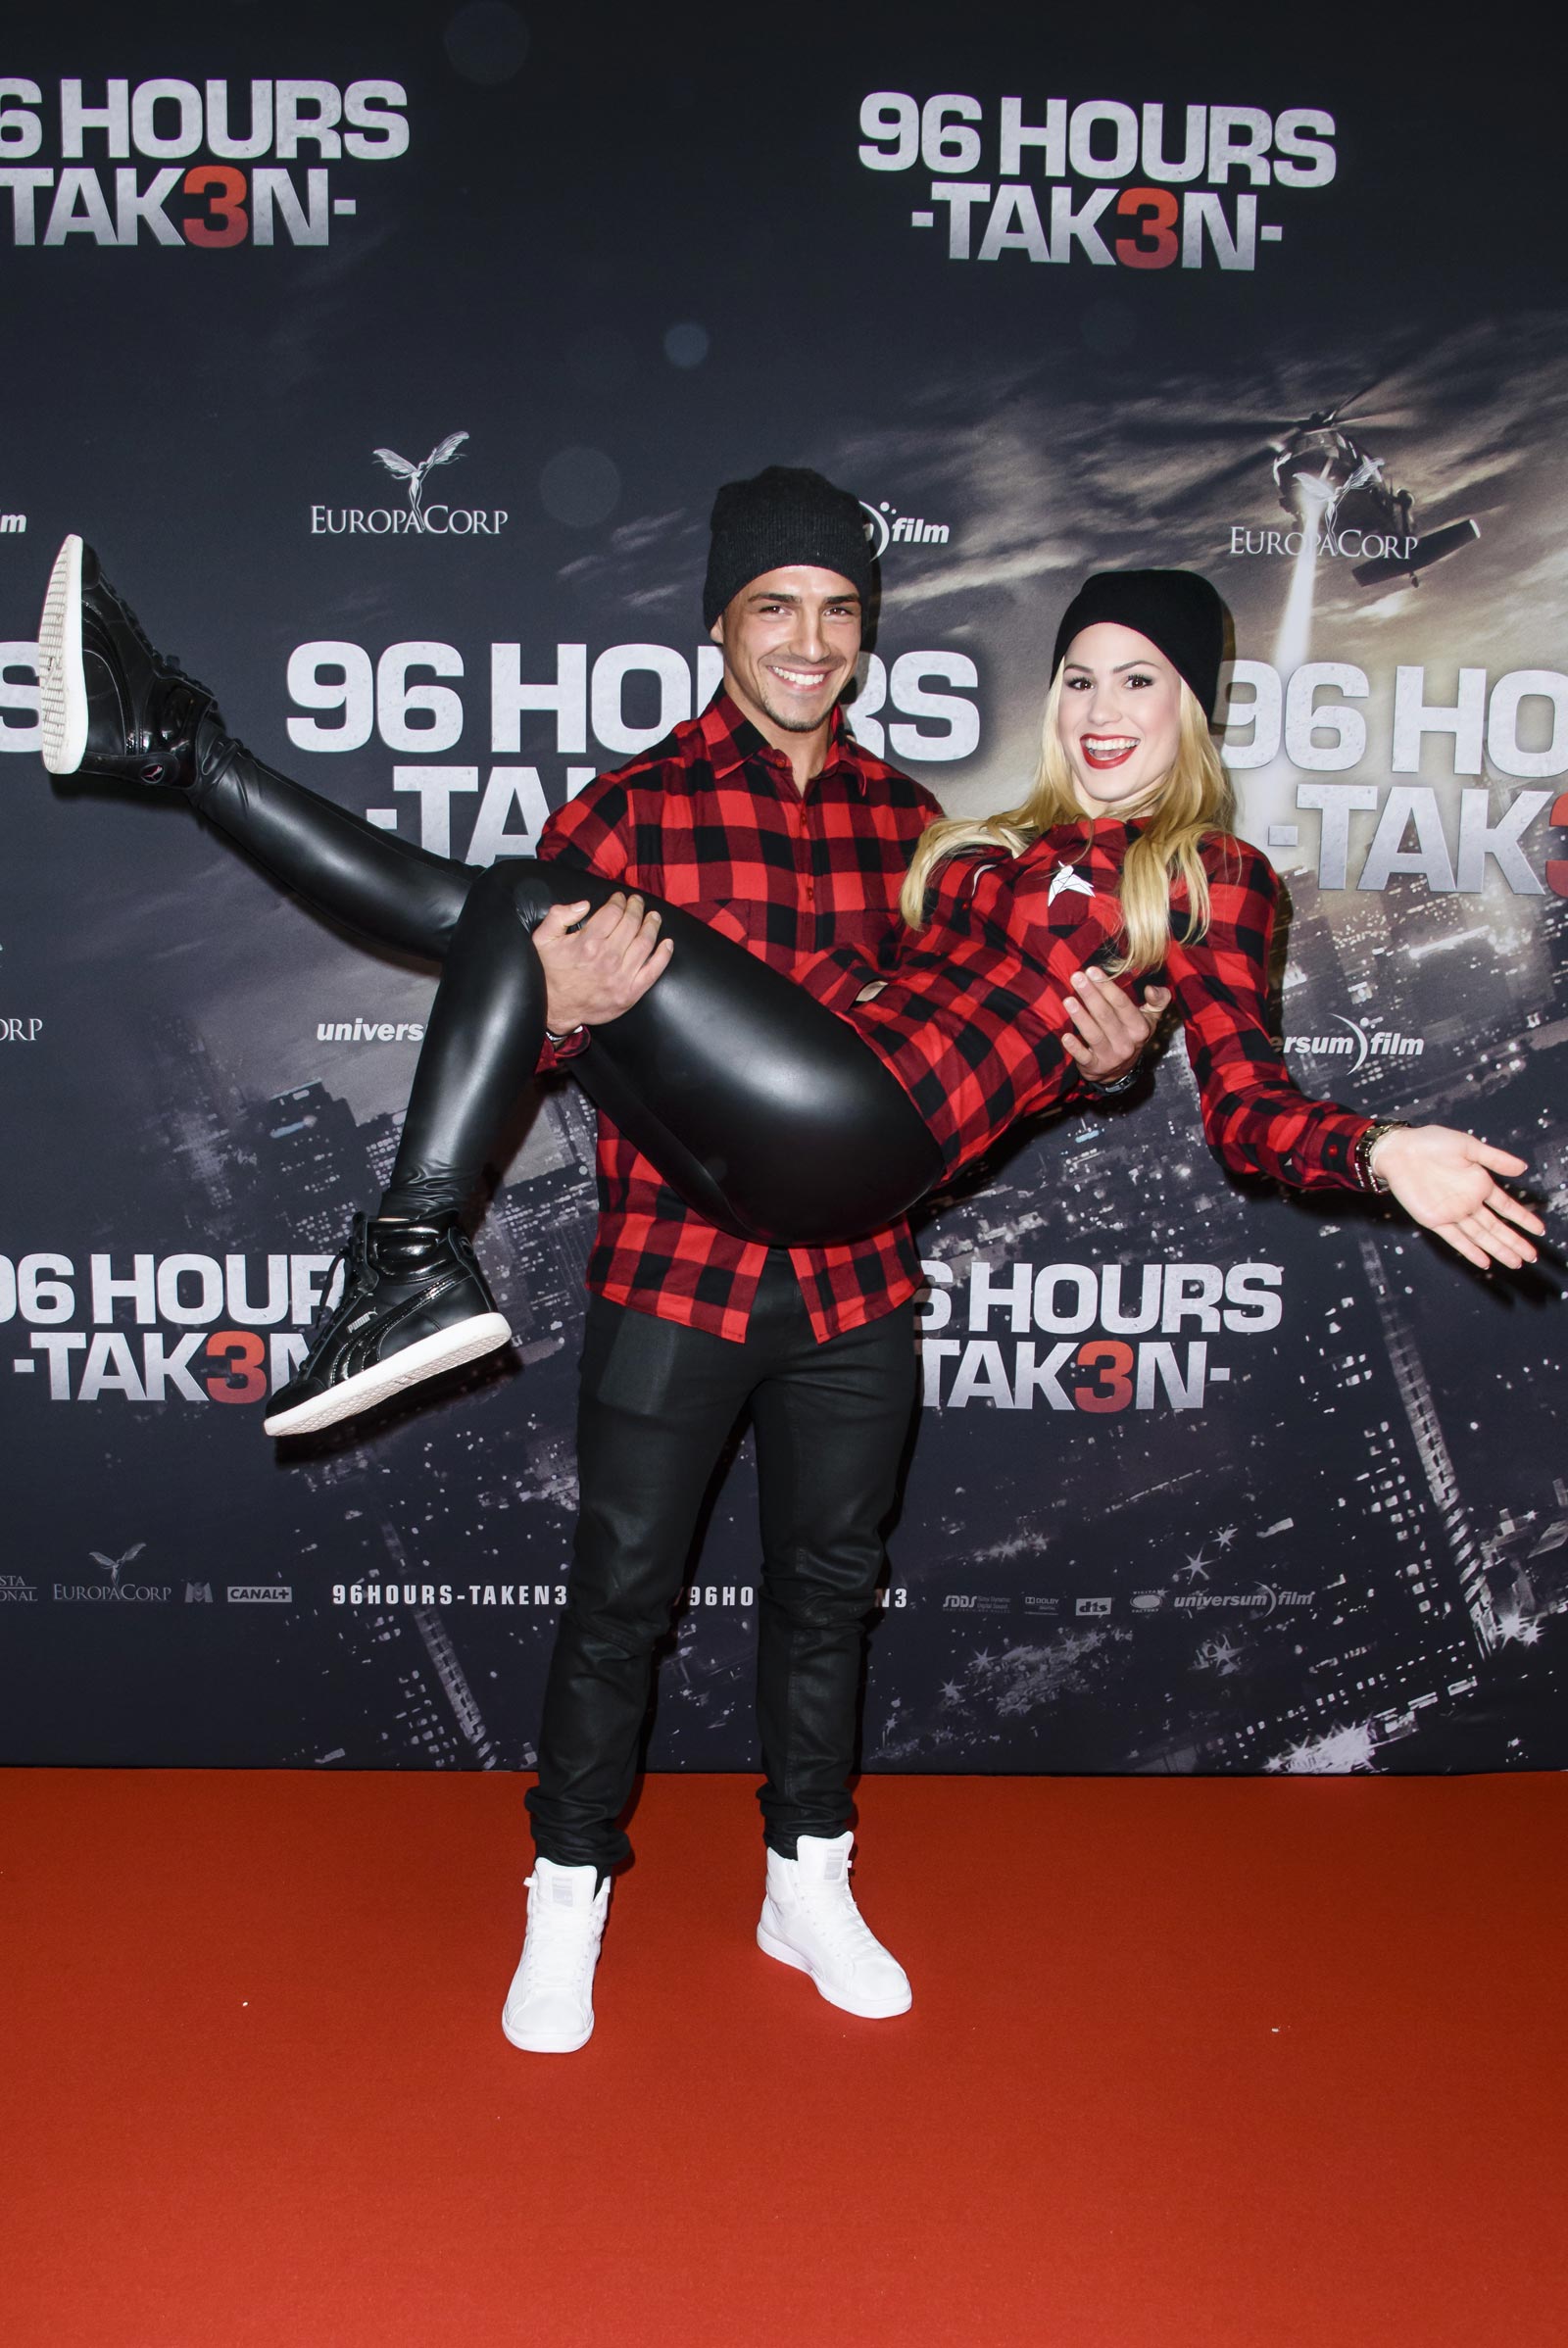 Angelina Heger attends the premiere 96 Hours - Taken 3